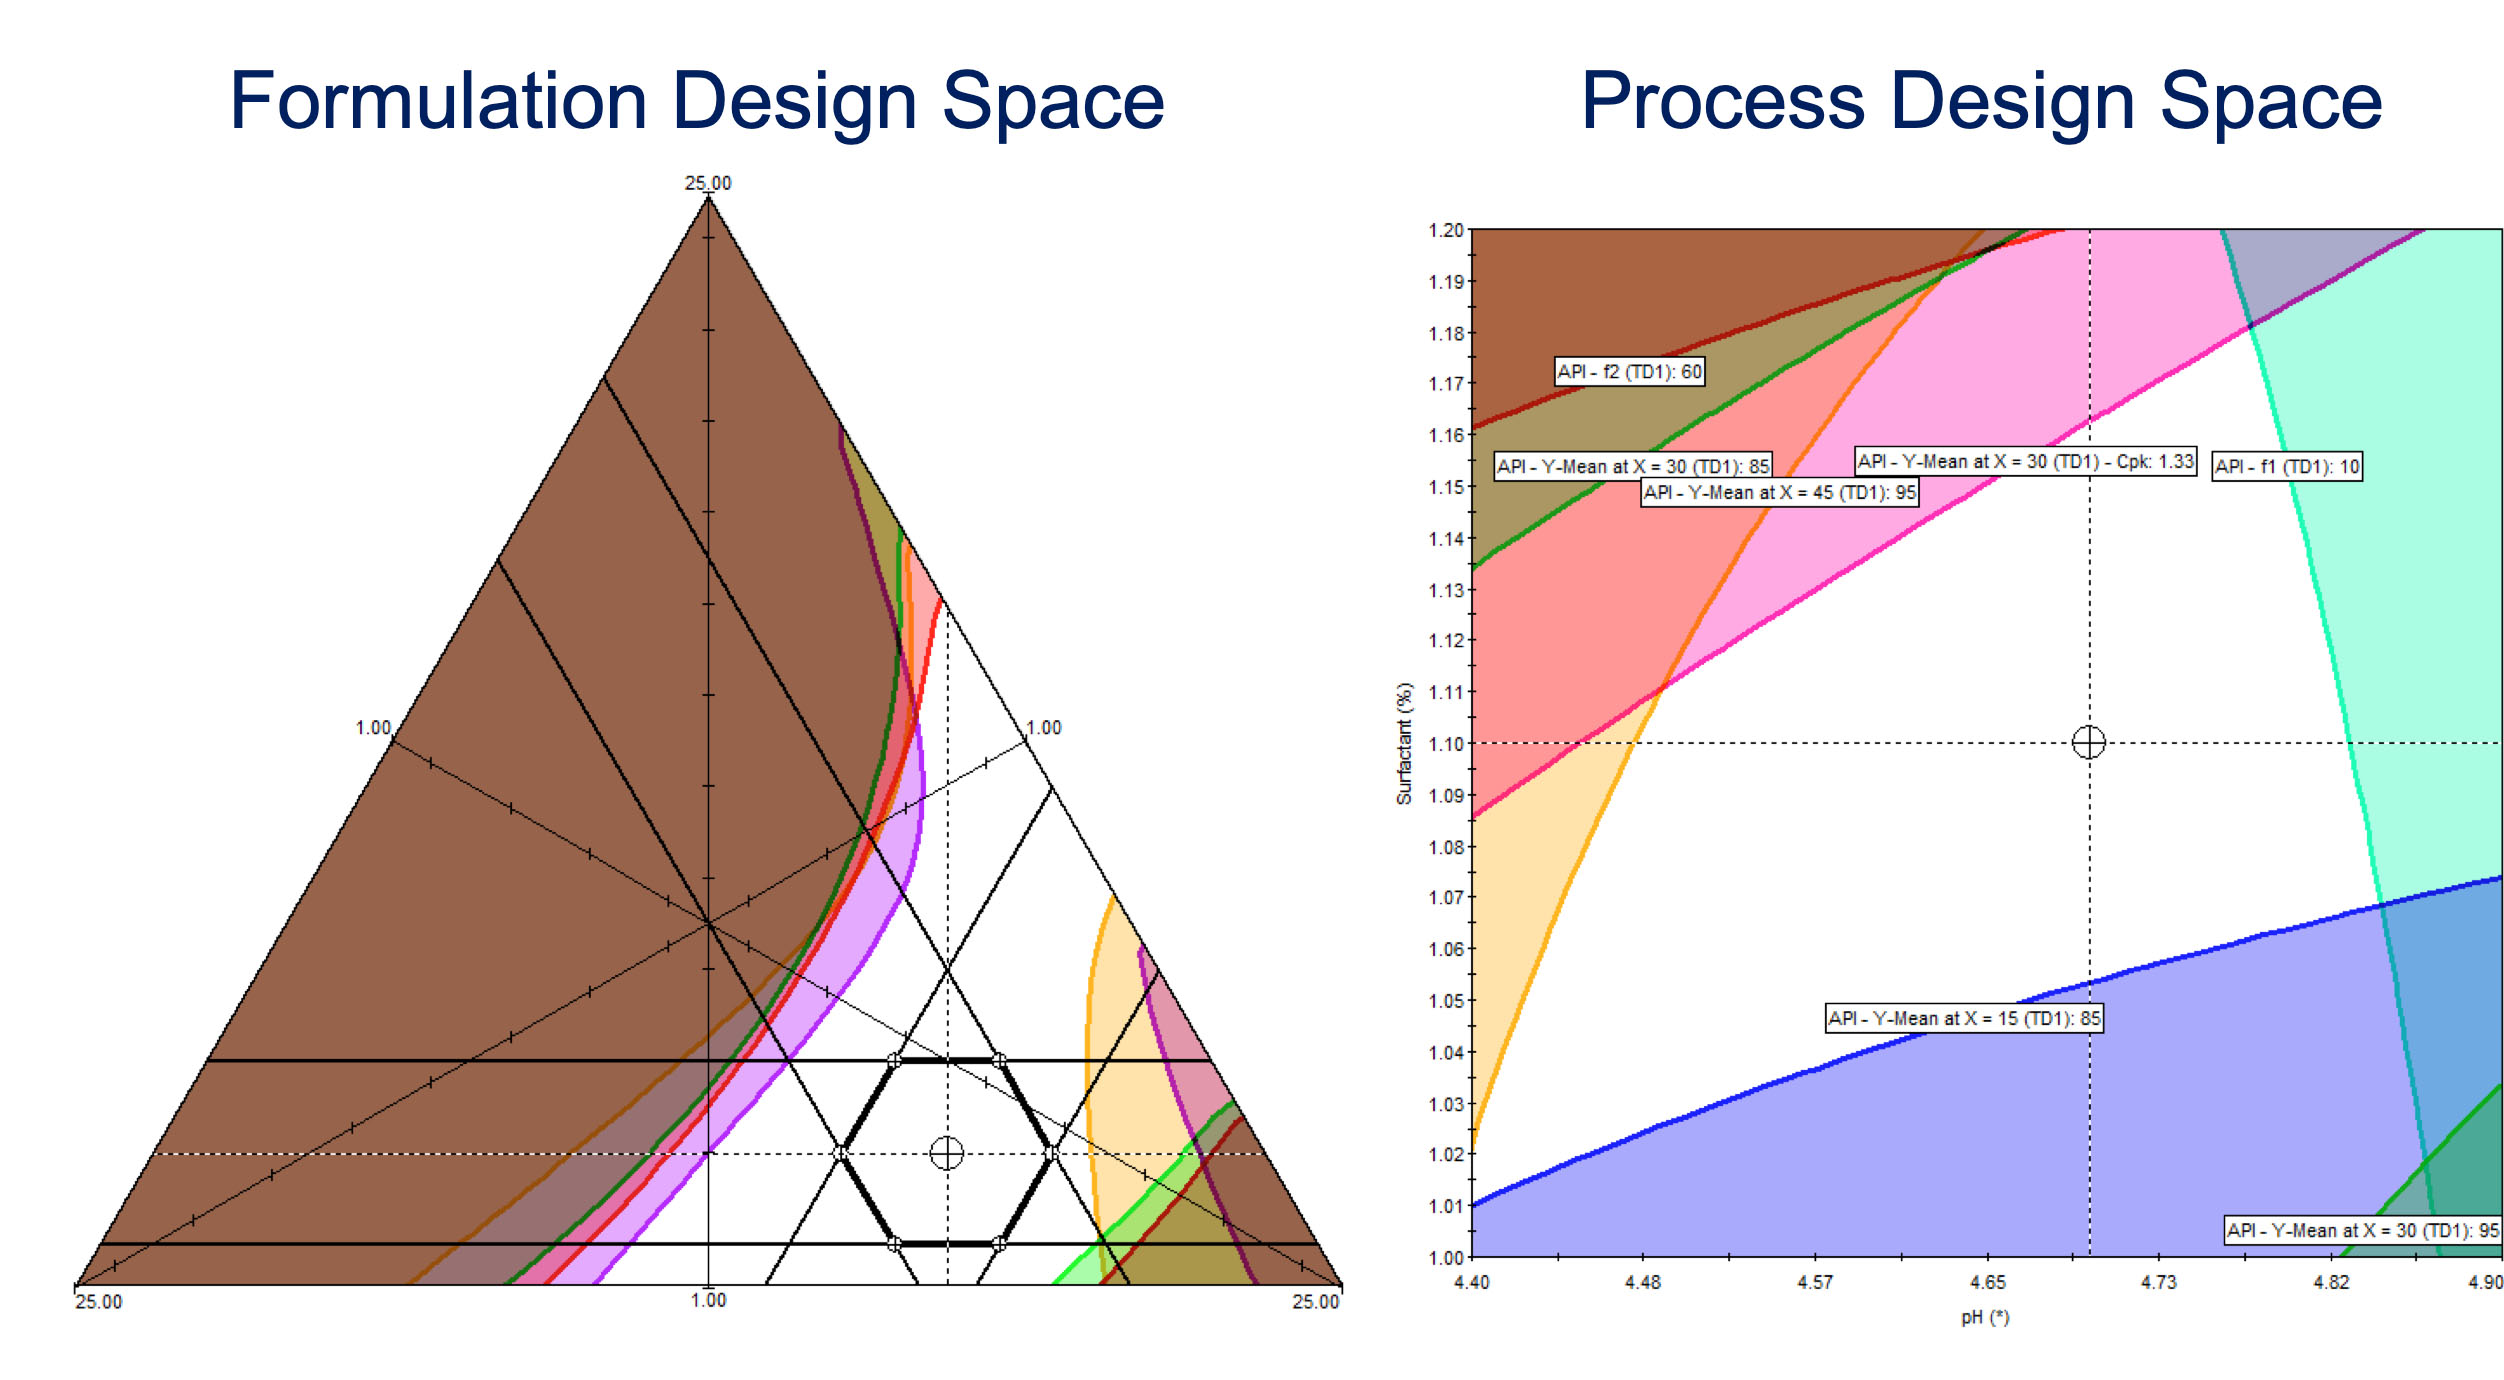 Formulation and Process Design Spaces